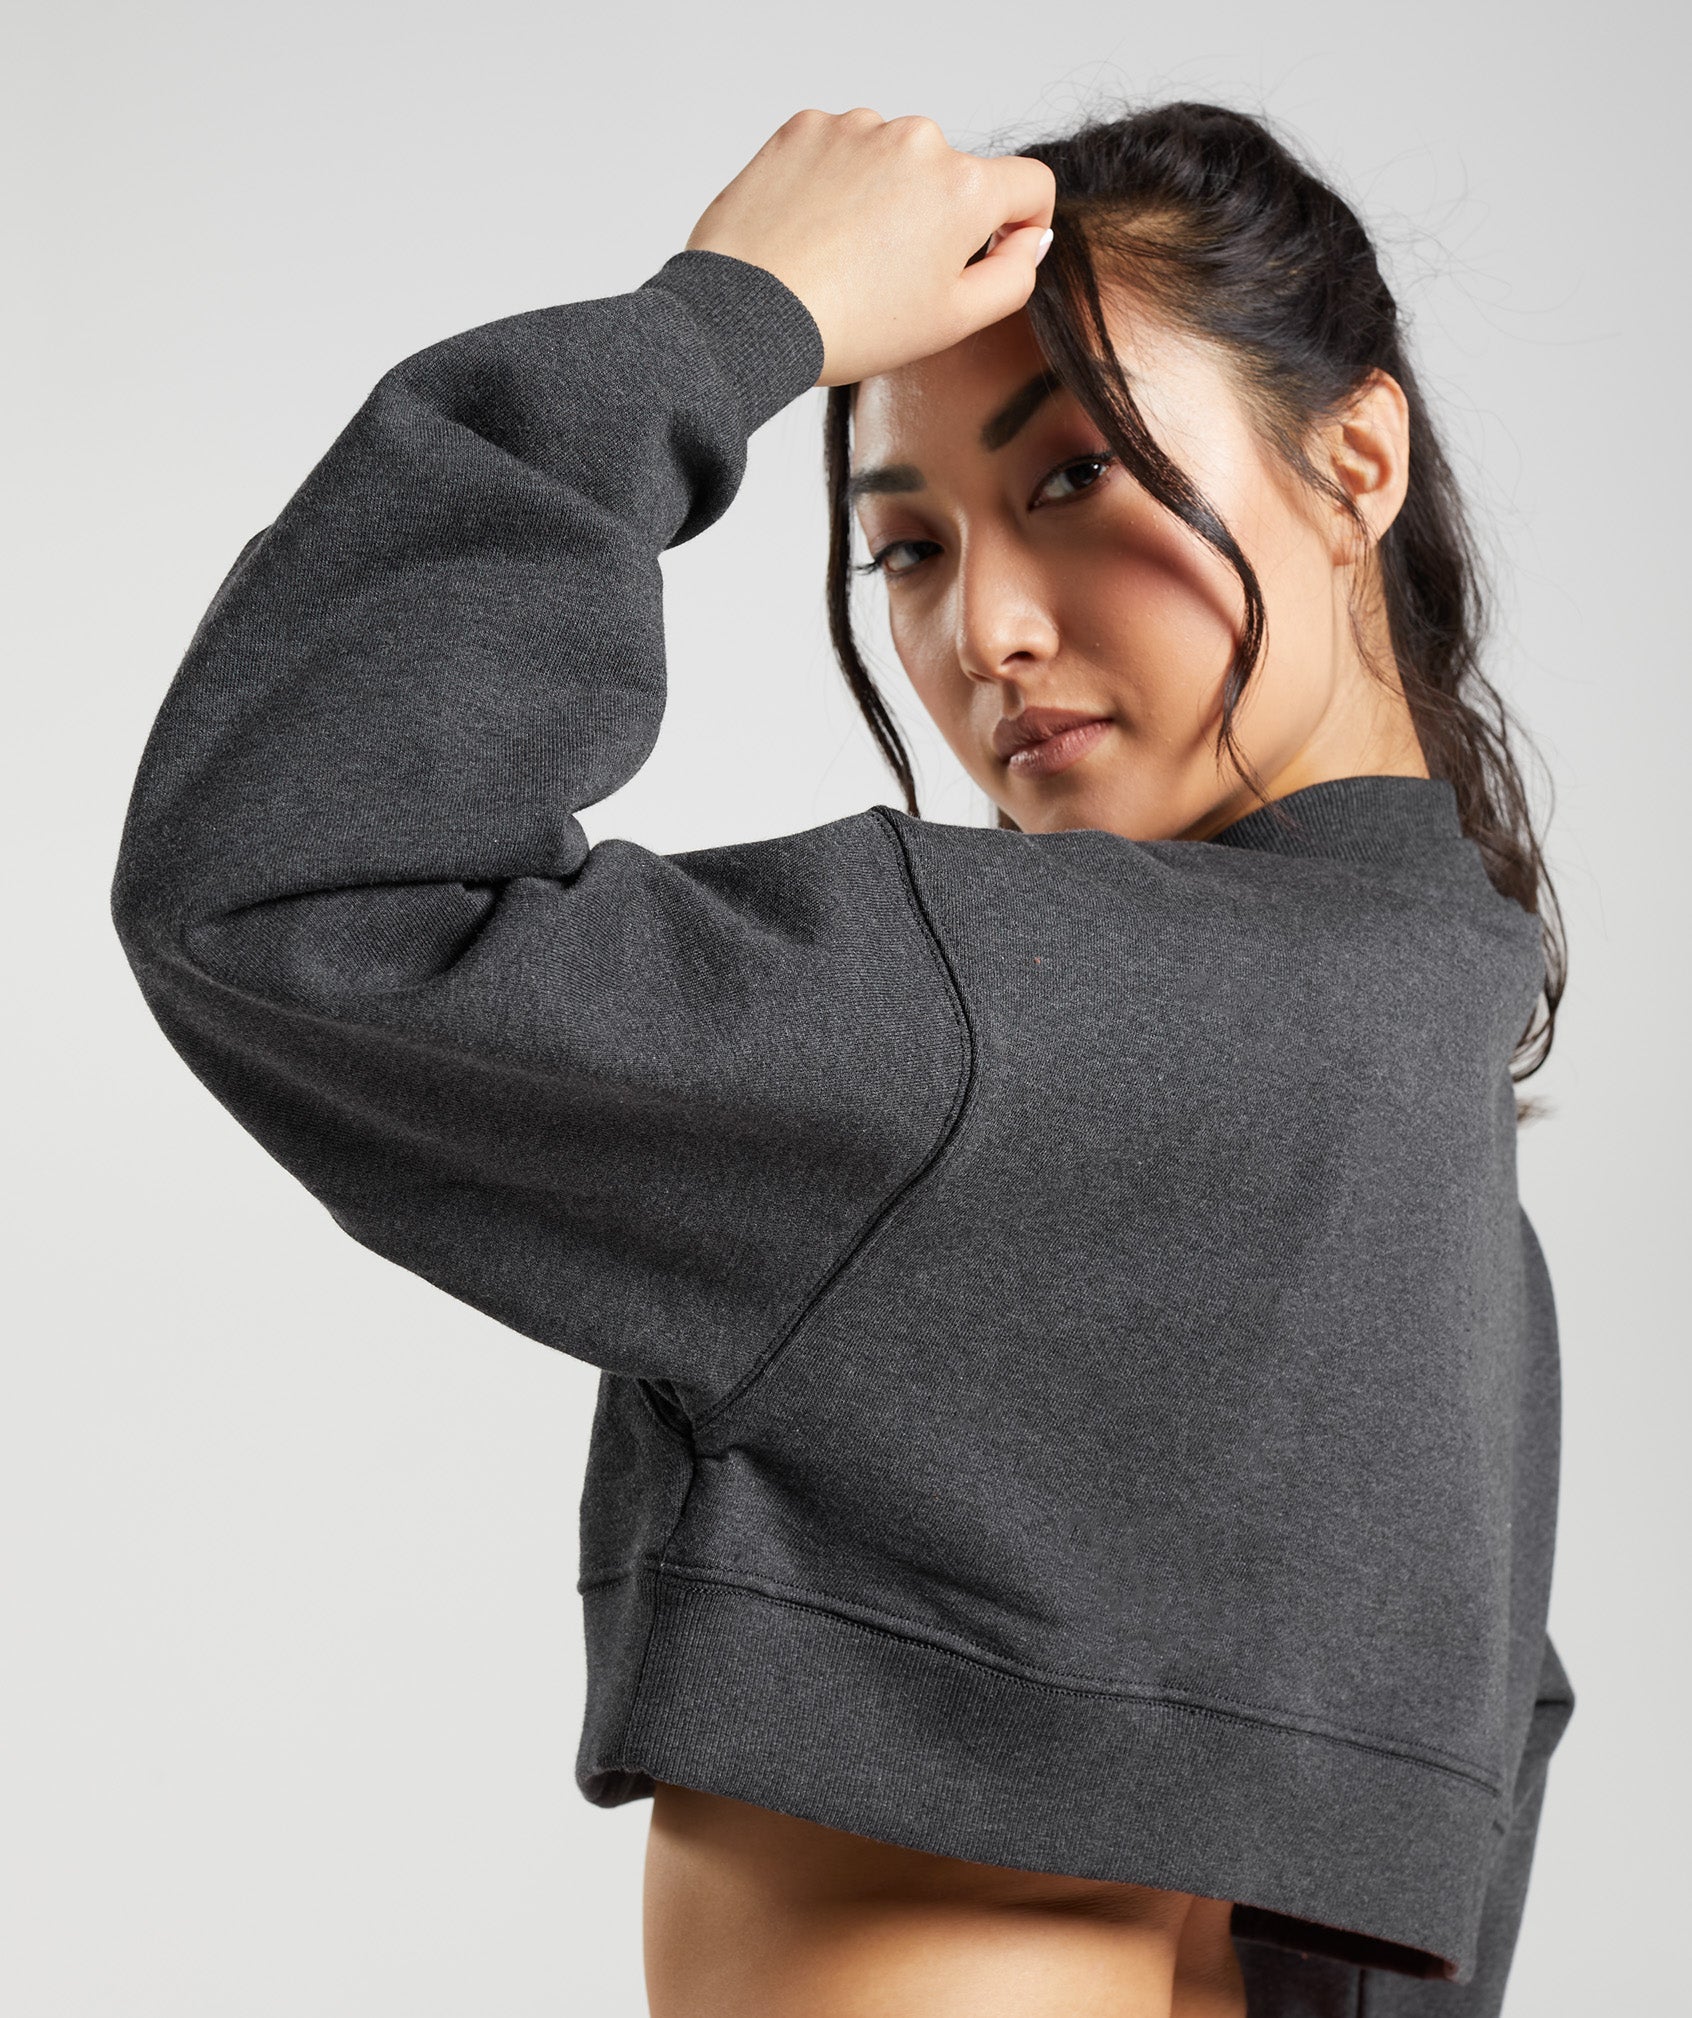 Rest Day Sweats Cropped Pullover in Black Core Marl - view 5